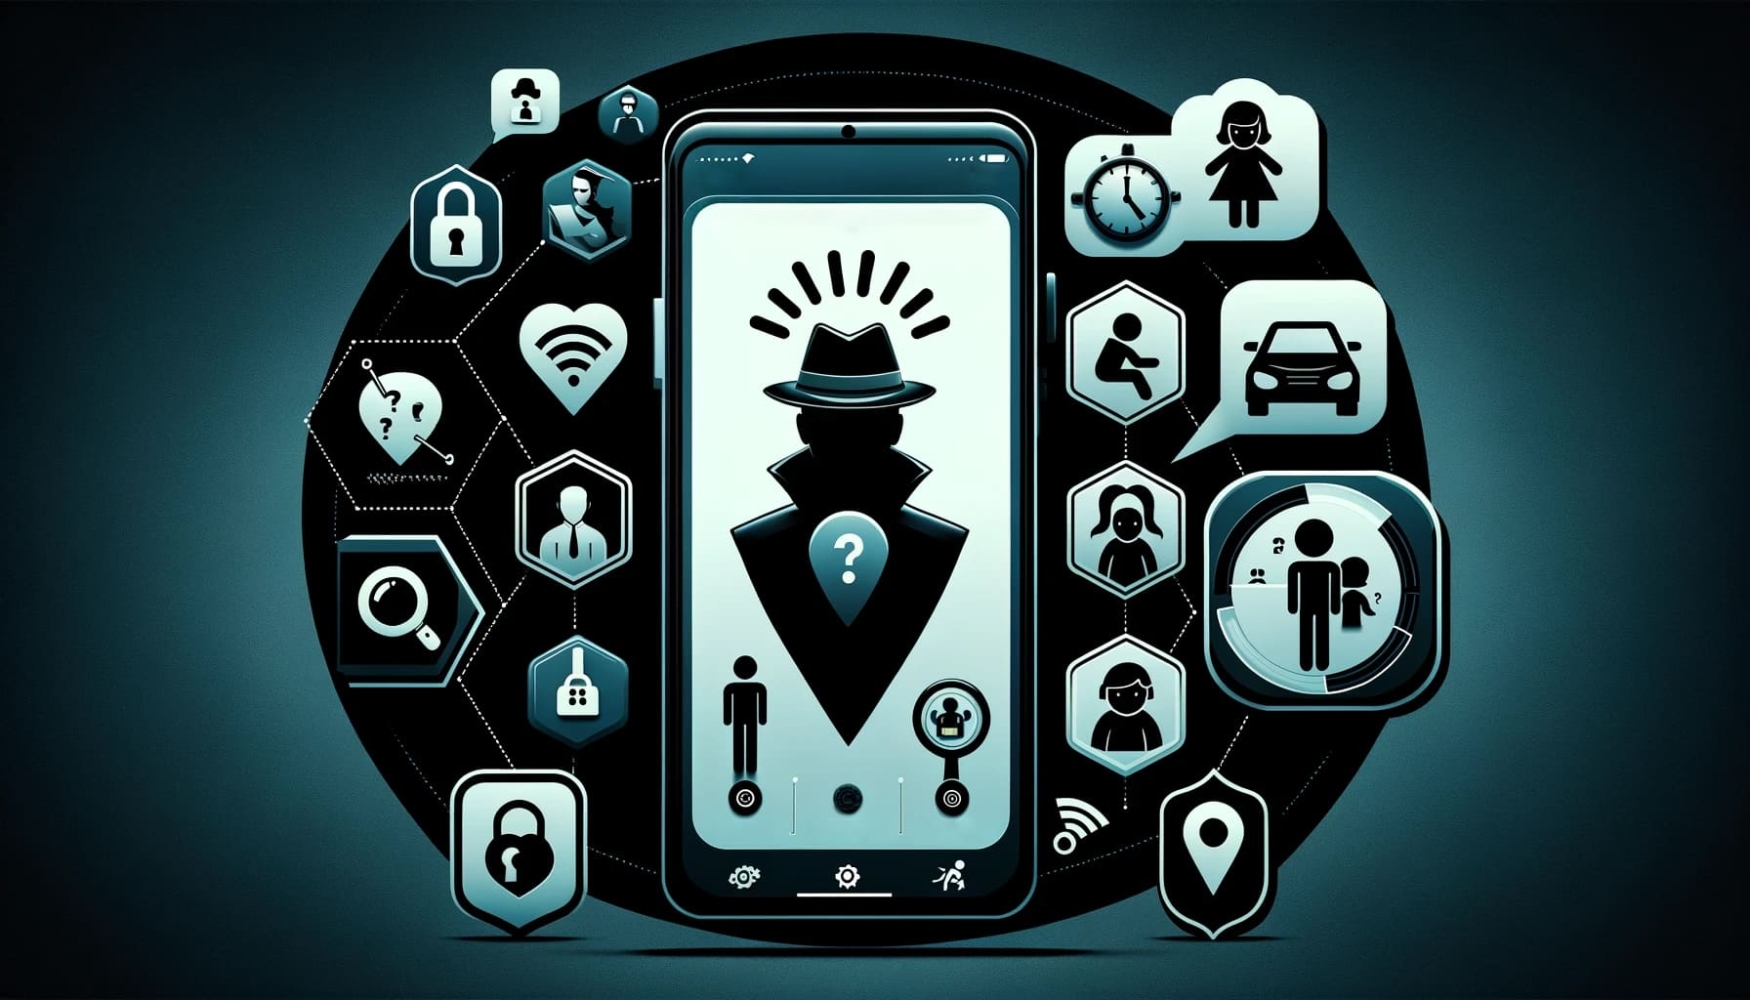 A conceptual design of a smartphone displaying a stealth mode tracking app interface with icons for different user demographics like employers, parents, and children, as well as features like remote control, digital monitoring, and geofencing alerts, all encapsulated in a dark theme with a detective hat symbolizing discreet surveillance.